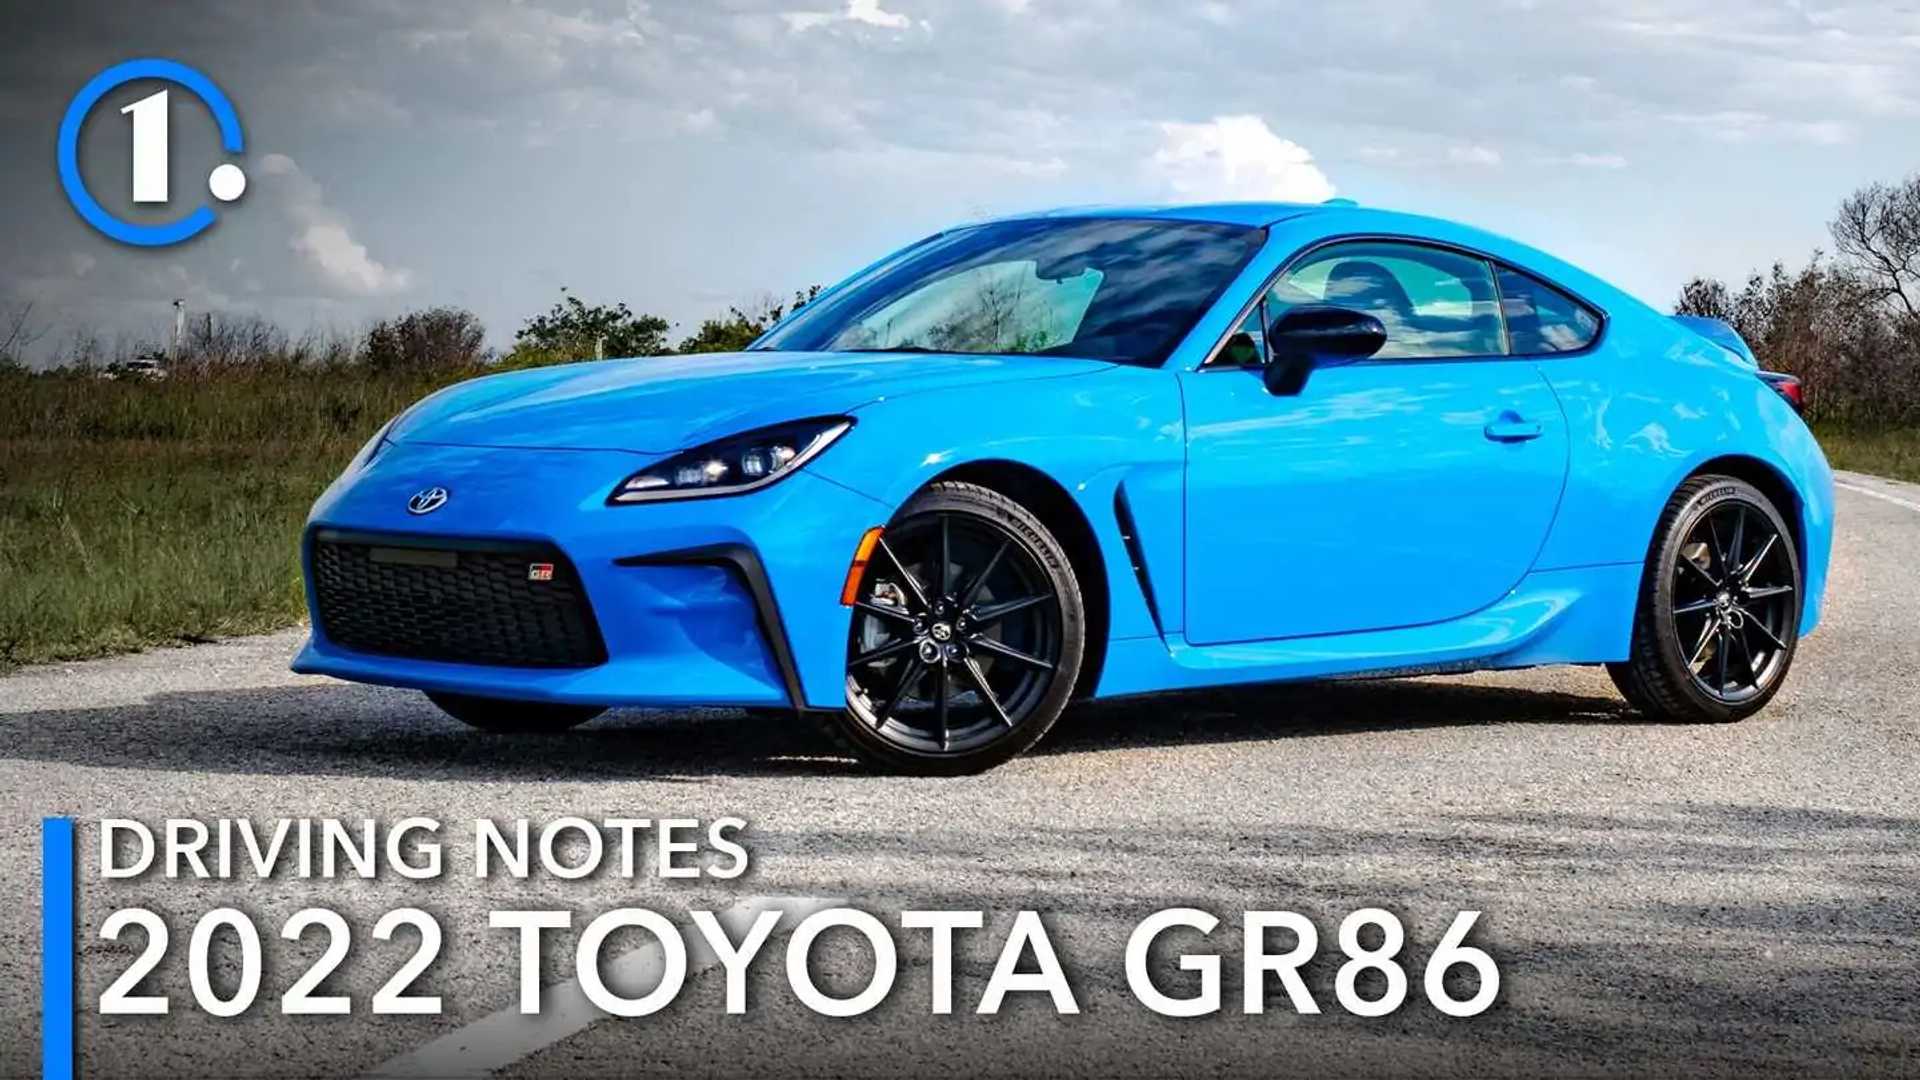 2022 Toyota GR86 Driving Notes: A Good Day Well Spent